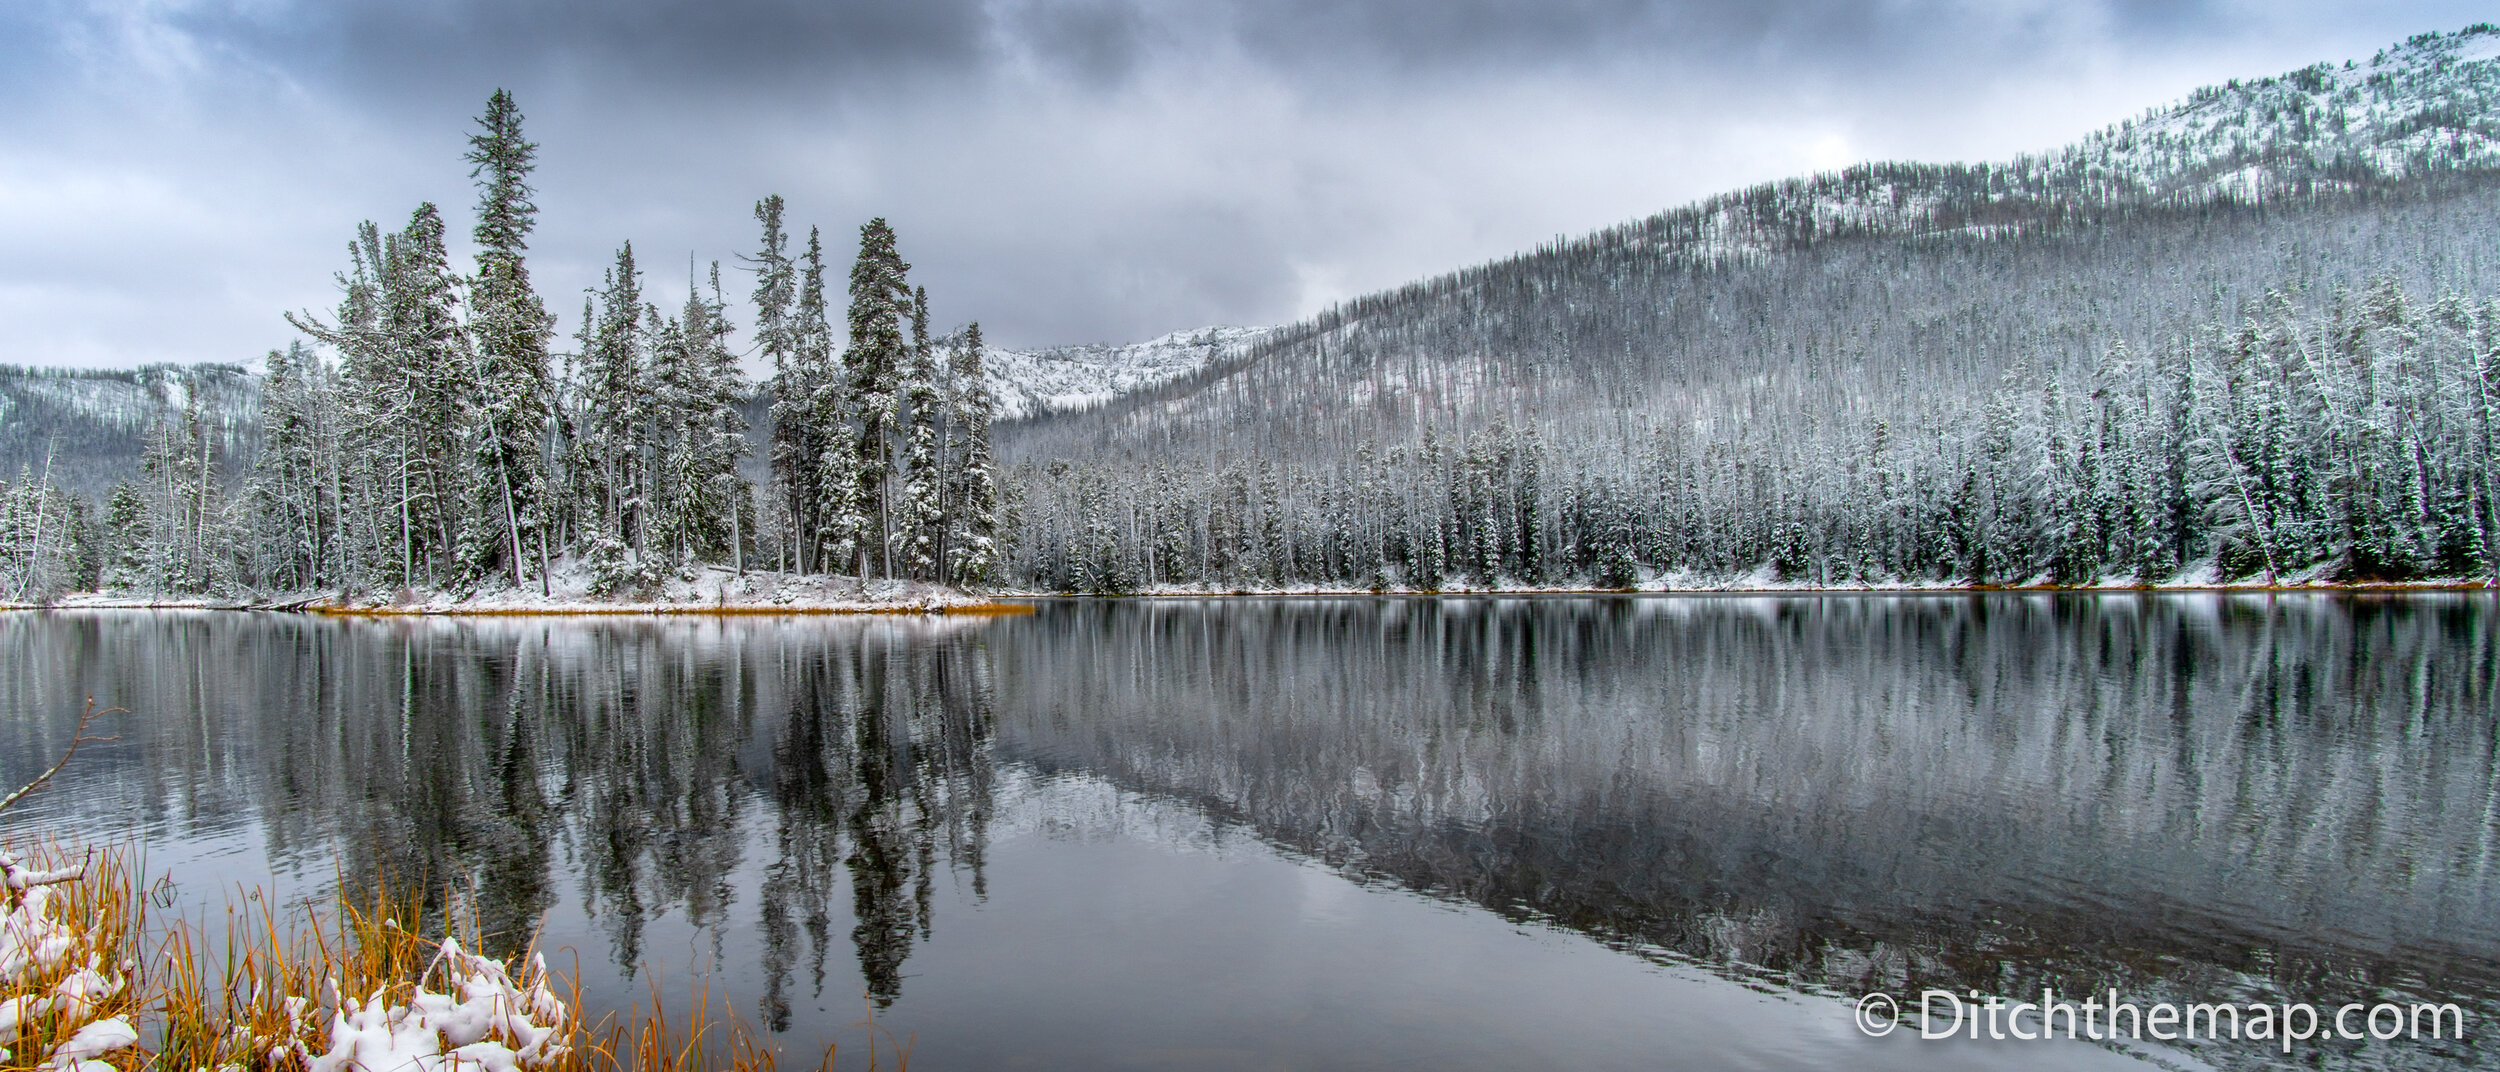 Light snow covered trees and mountain with reflection on lake